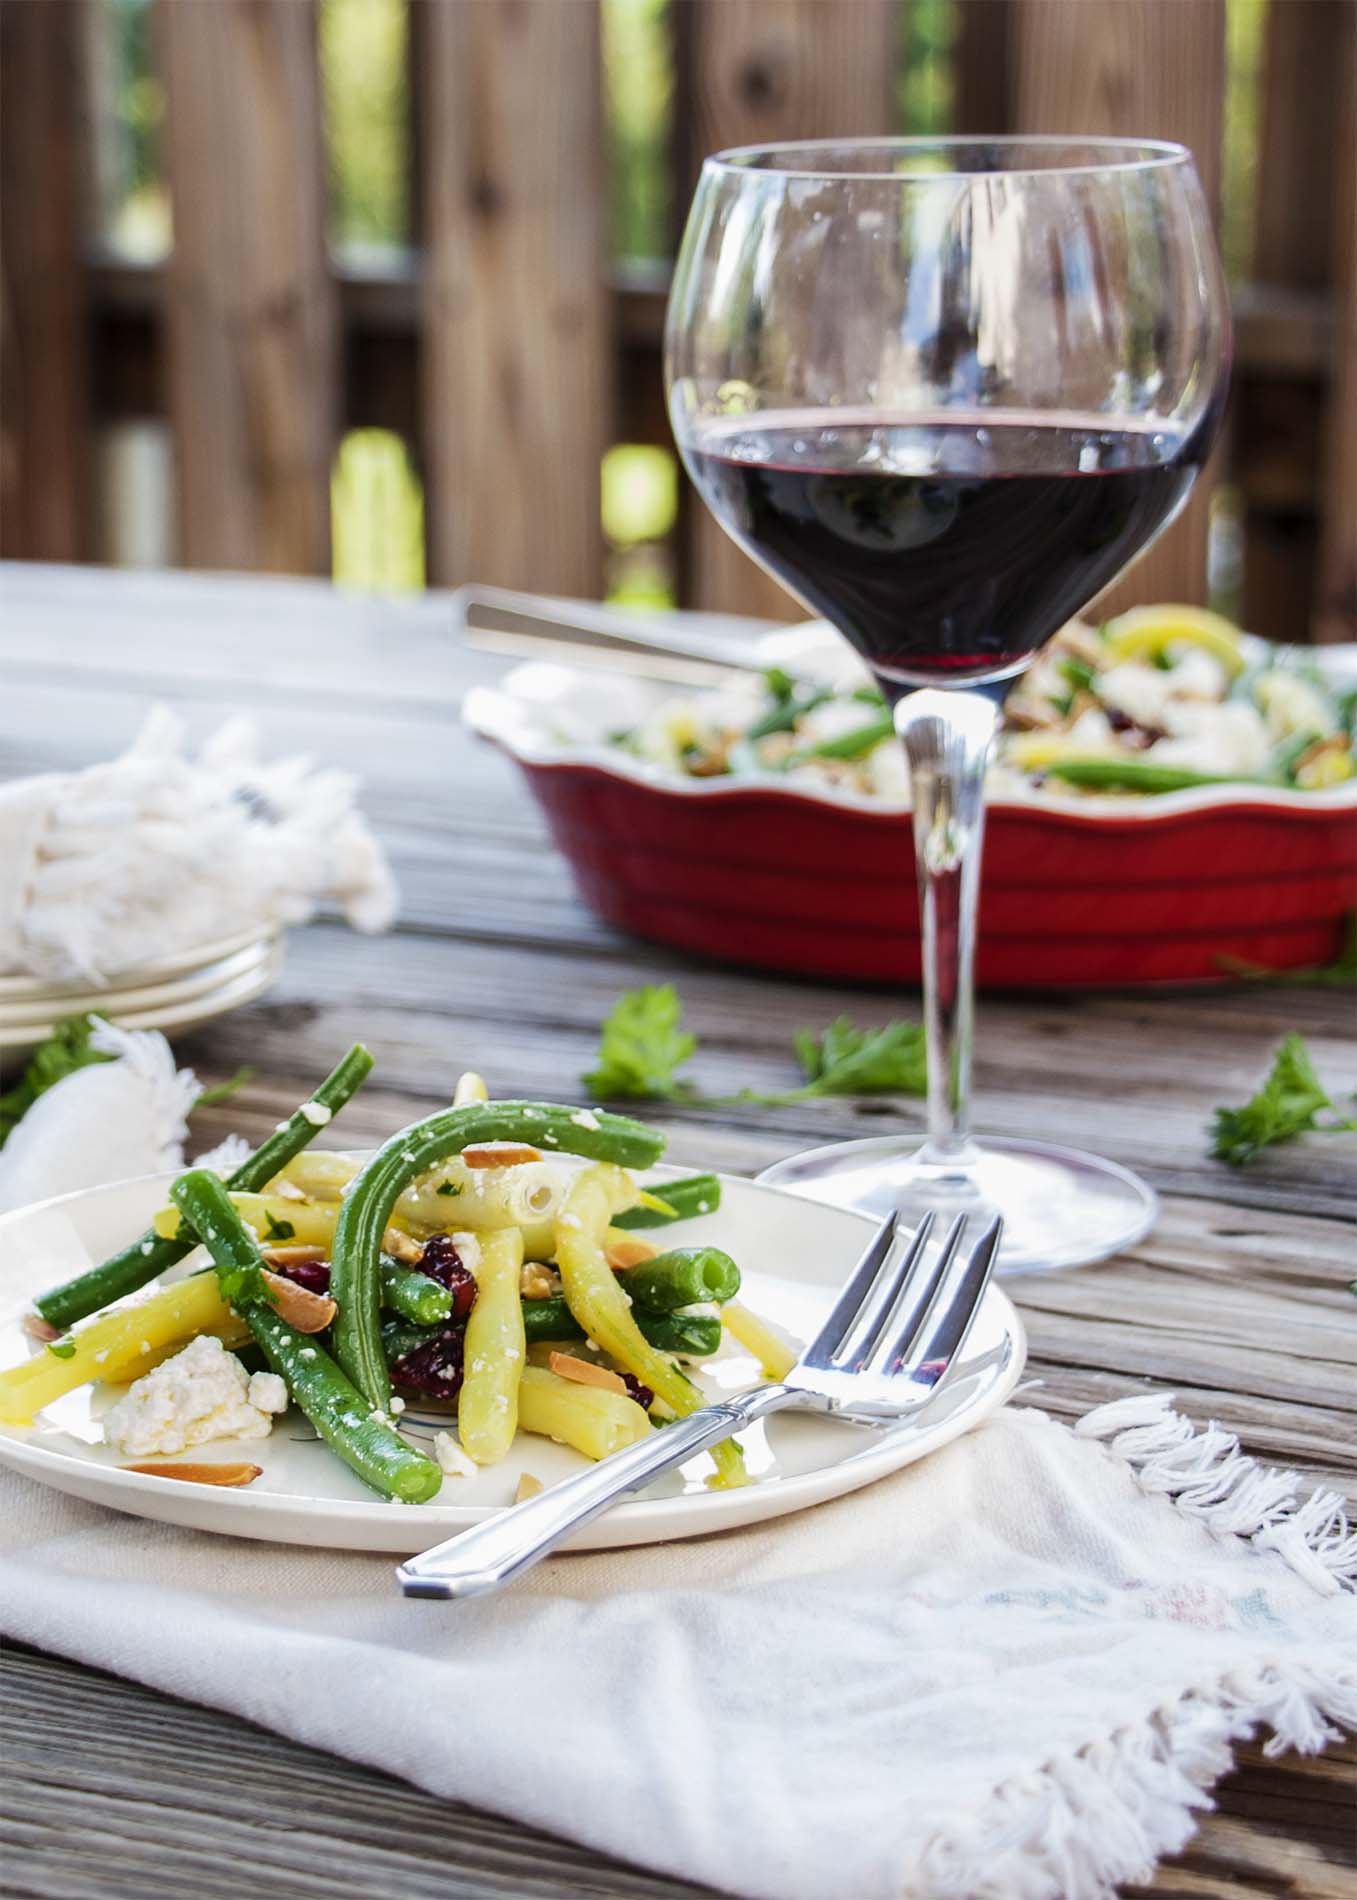 Green Bean Salad with Goat Cheese and Almonds - This salad is the perfect balance of sweet, salty, and crunchy, all combined with tender green beans. It's the only green bean salad you will ever need. | justalittlebitofbacon.com